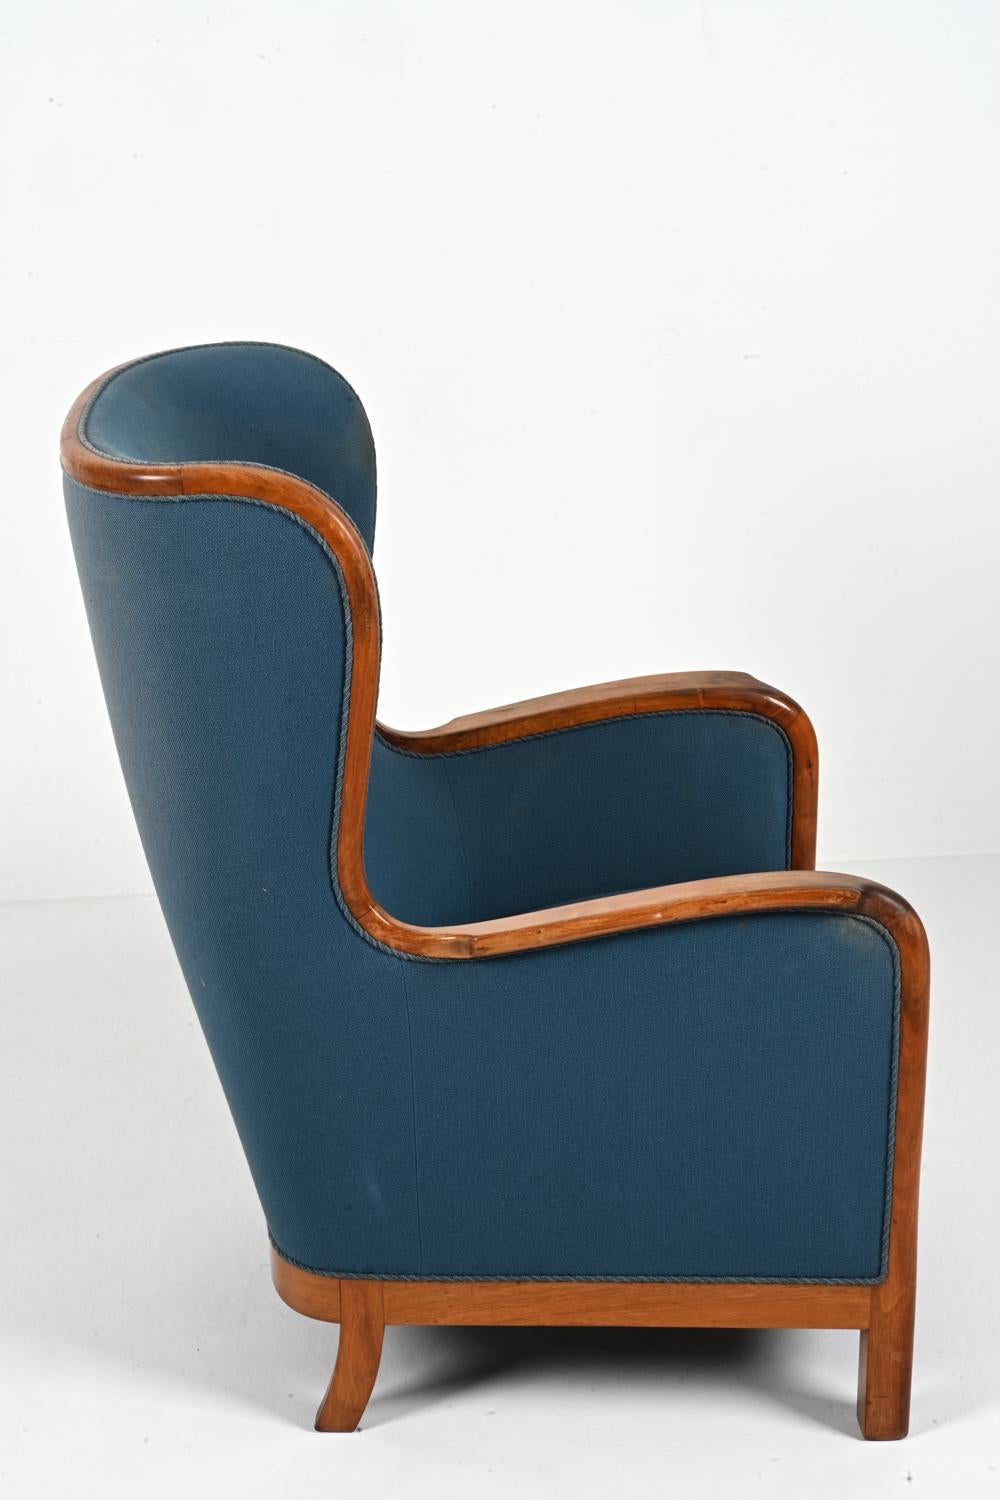 Danish Mahogany Wingback Easy Chair by Frits Henningsen, c. 1940's For Sale 9